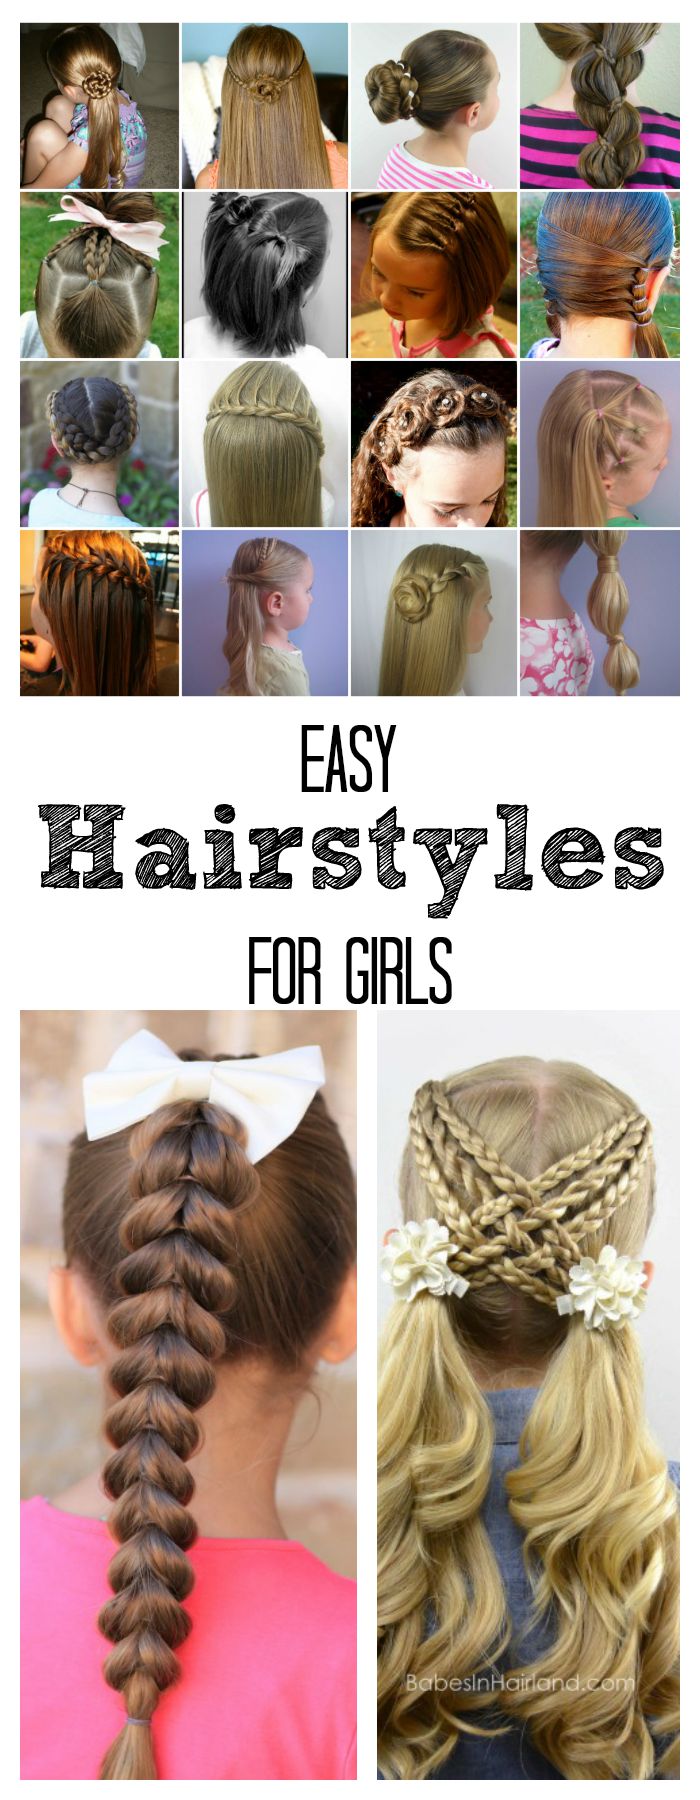 Easy-Hairstyles-for-Girls-Hairdos